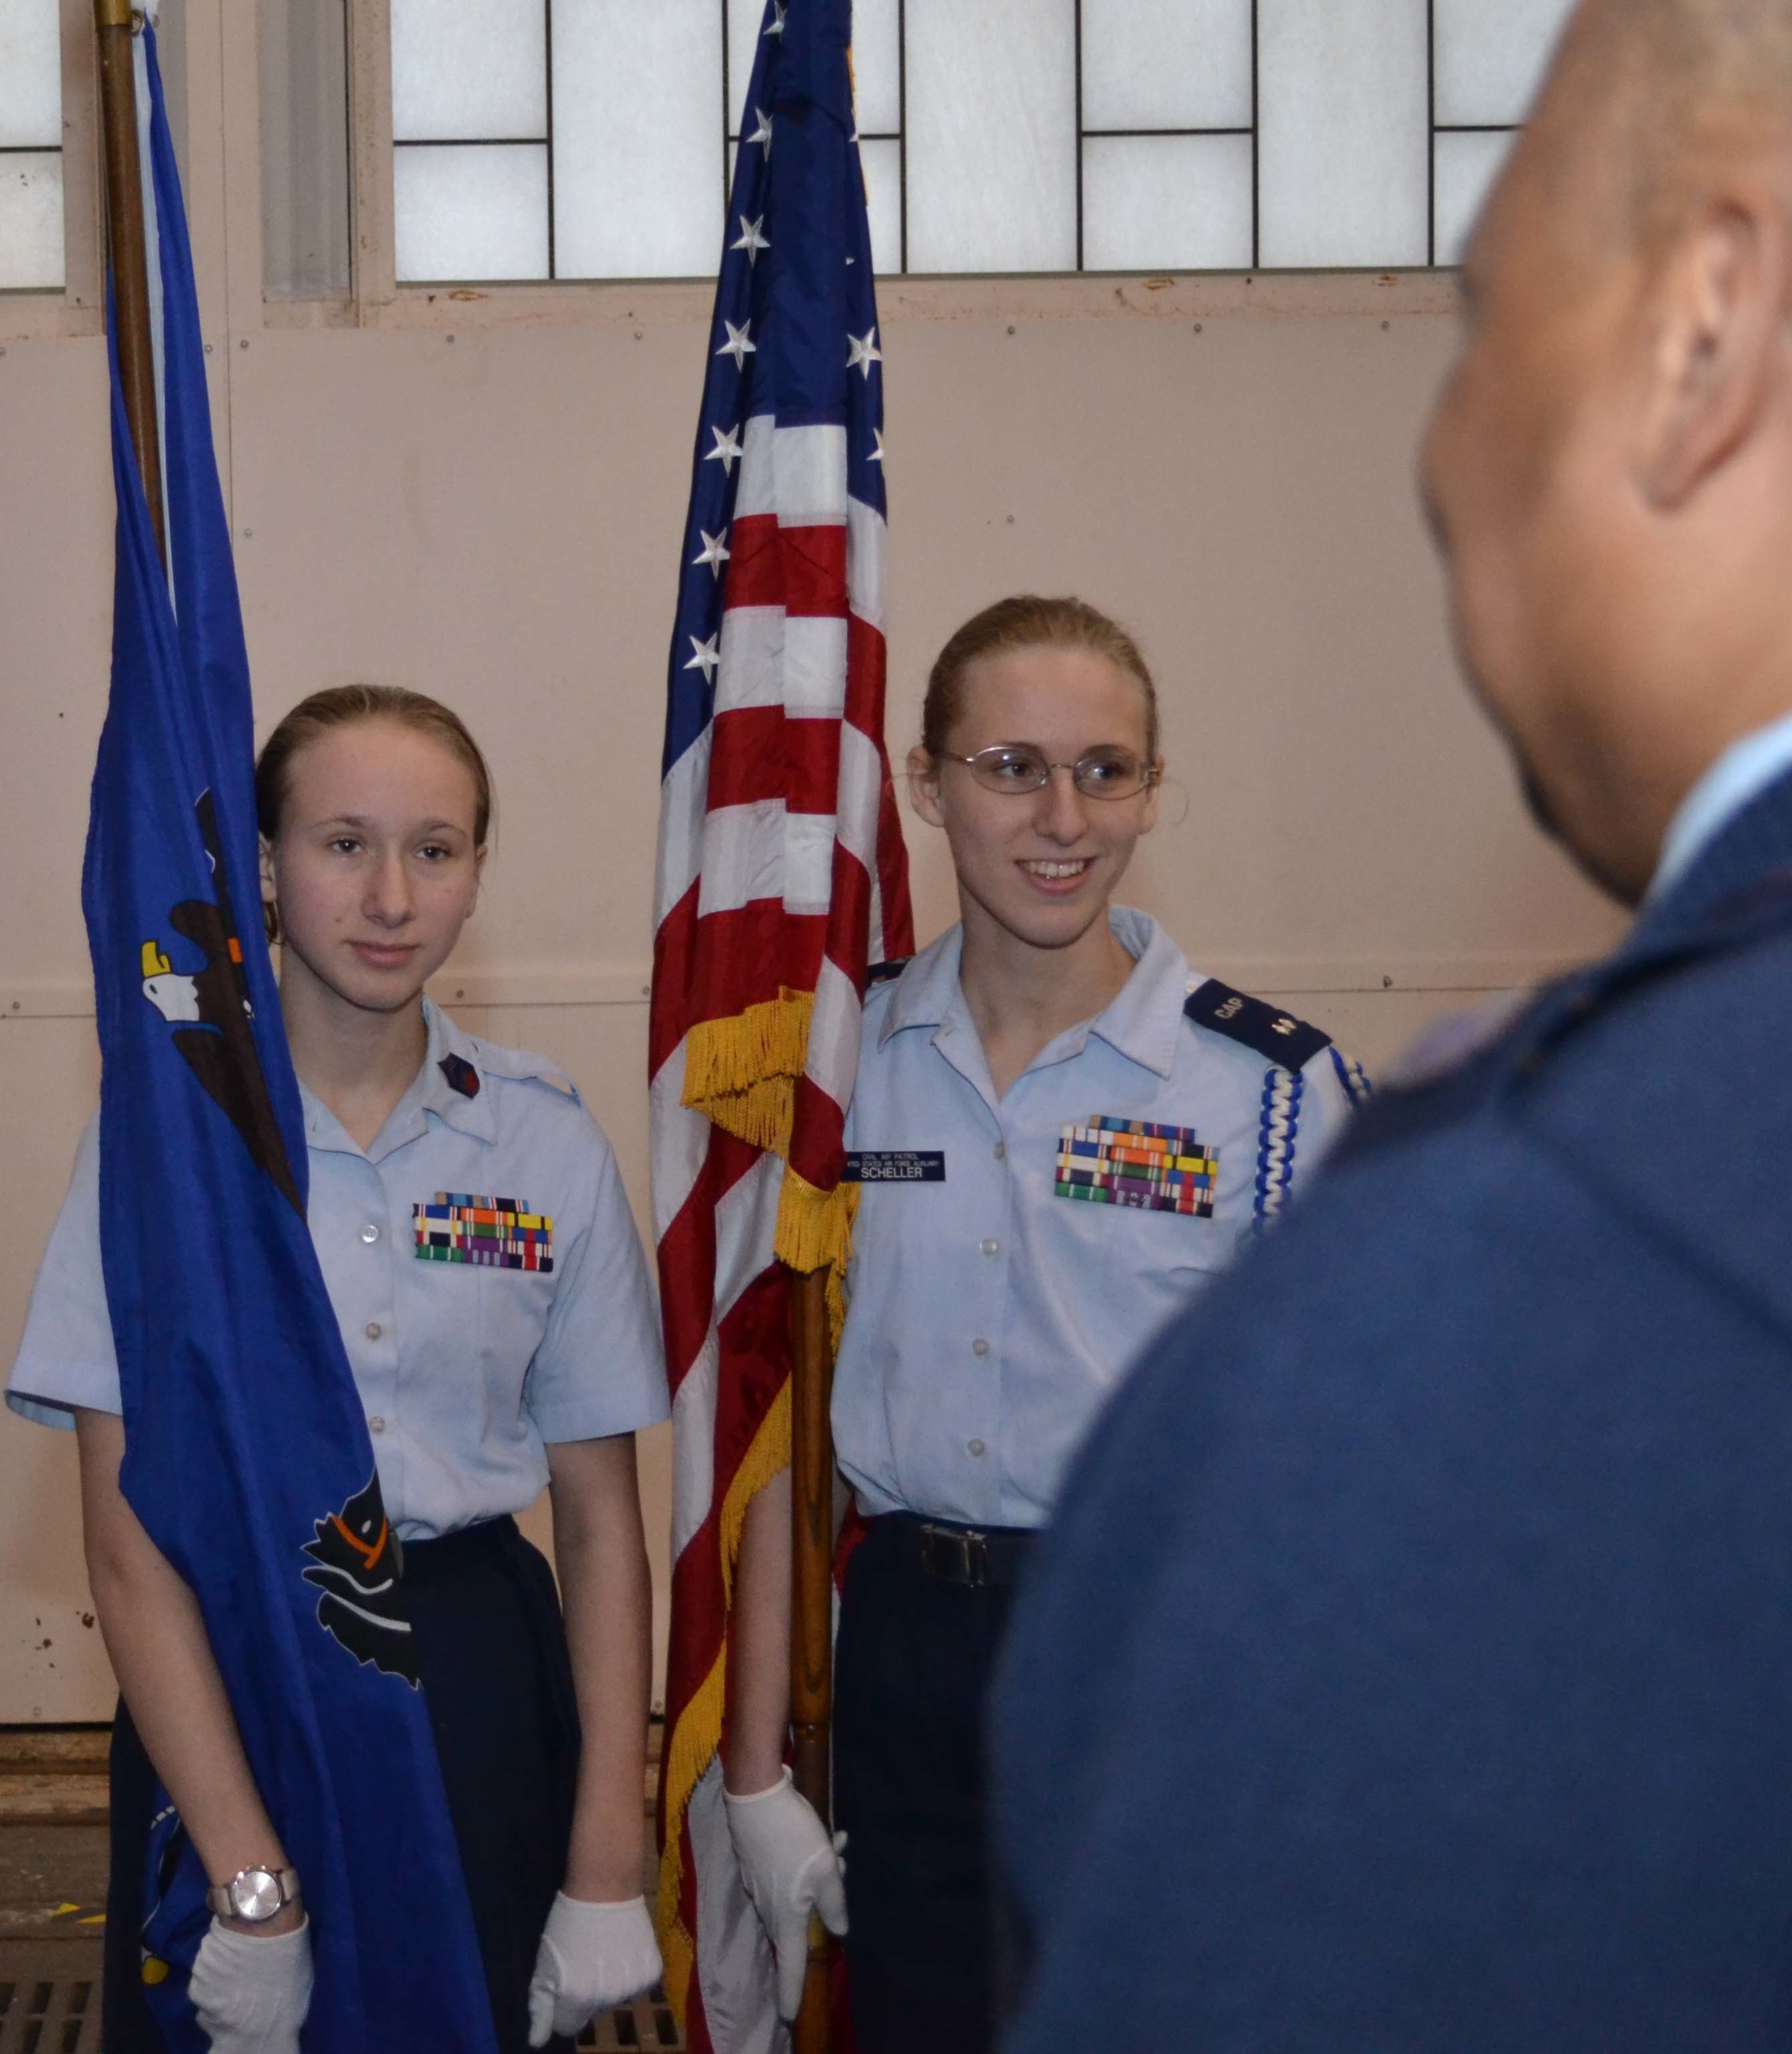 https://upload.wikimedia.org/wikipedia/commons/c/c4/Members_of_the_Civil_Air_Patrol_Squadron_801_Honor_Guard_in_Allentown%2C_Pa.%2C_listen_to_instruction.jpg